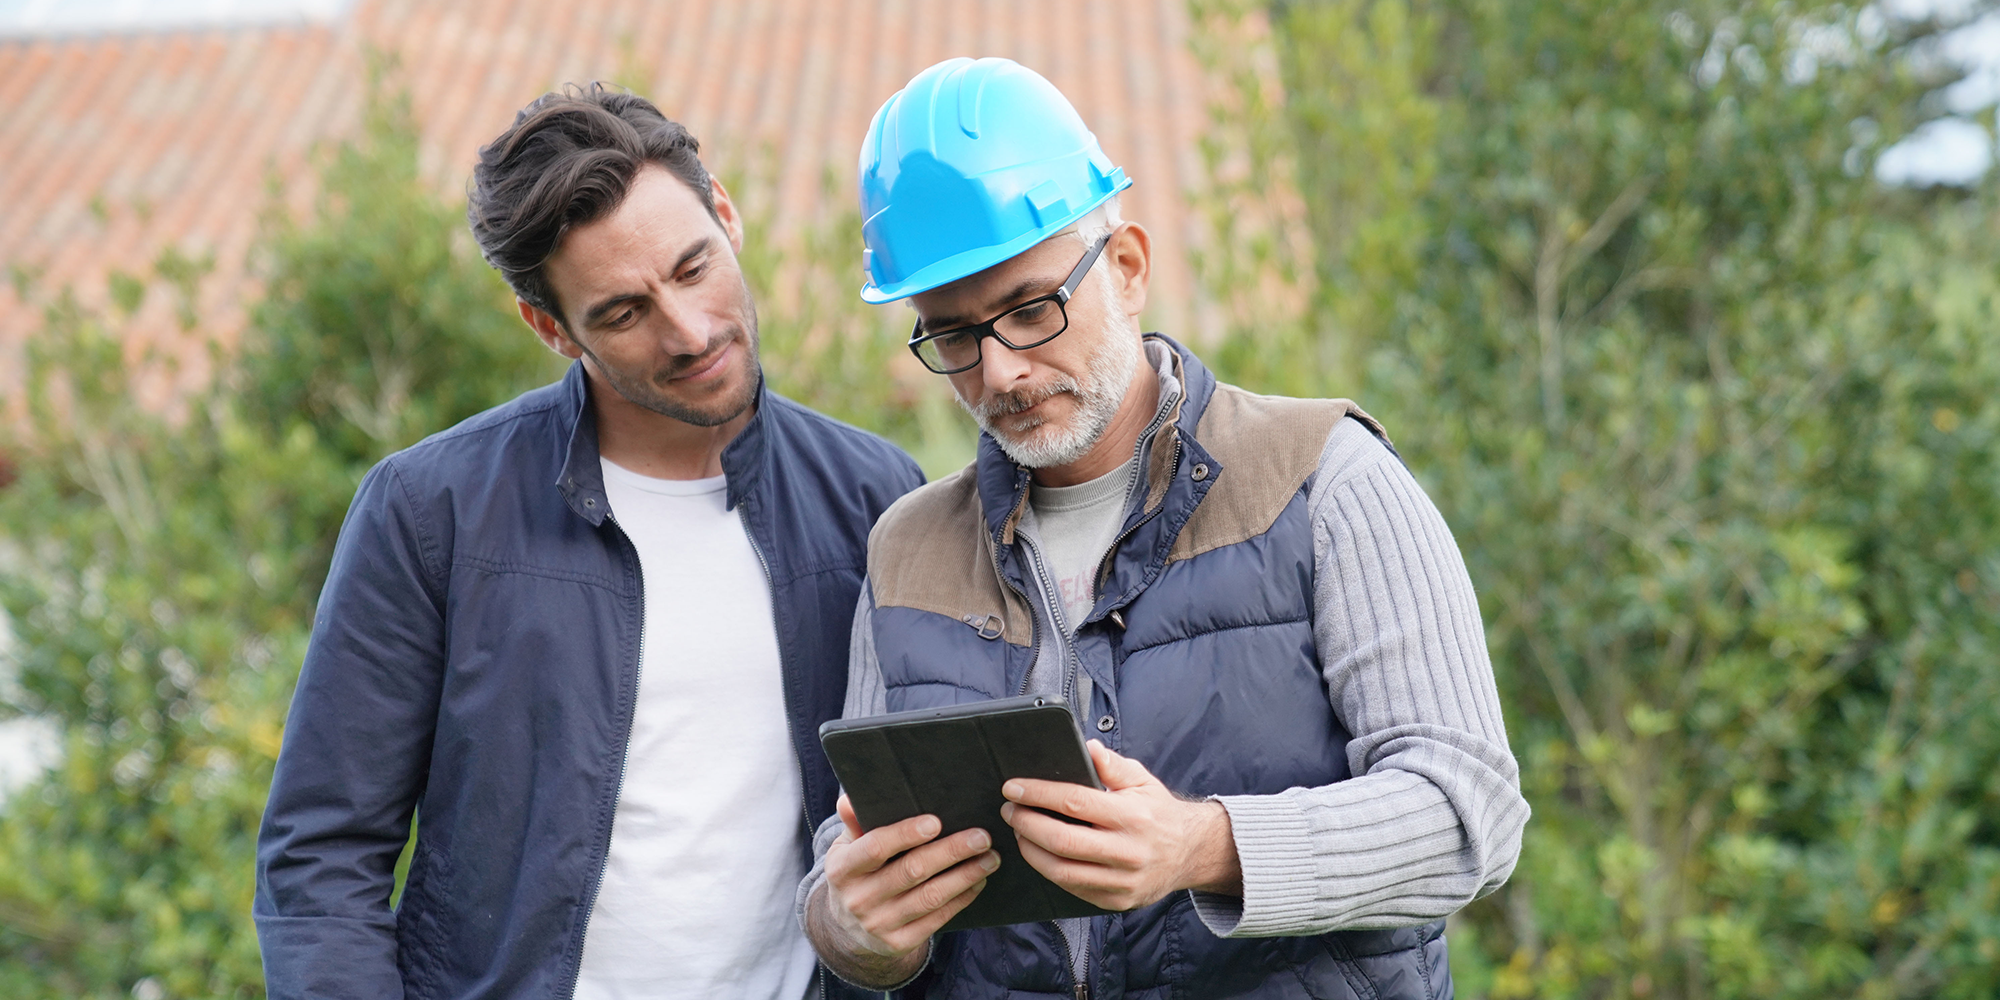 younger man next to an older man wearing a hard hat looking at a tablet